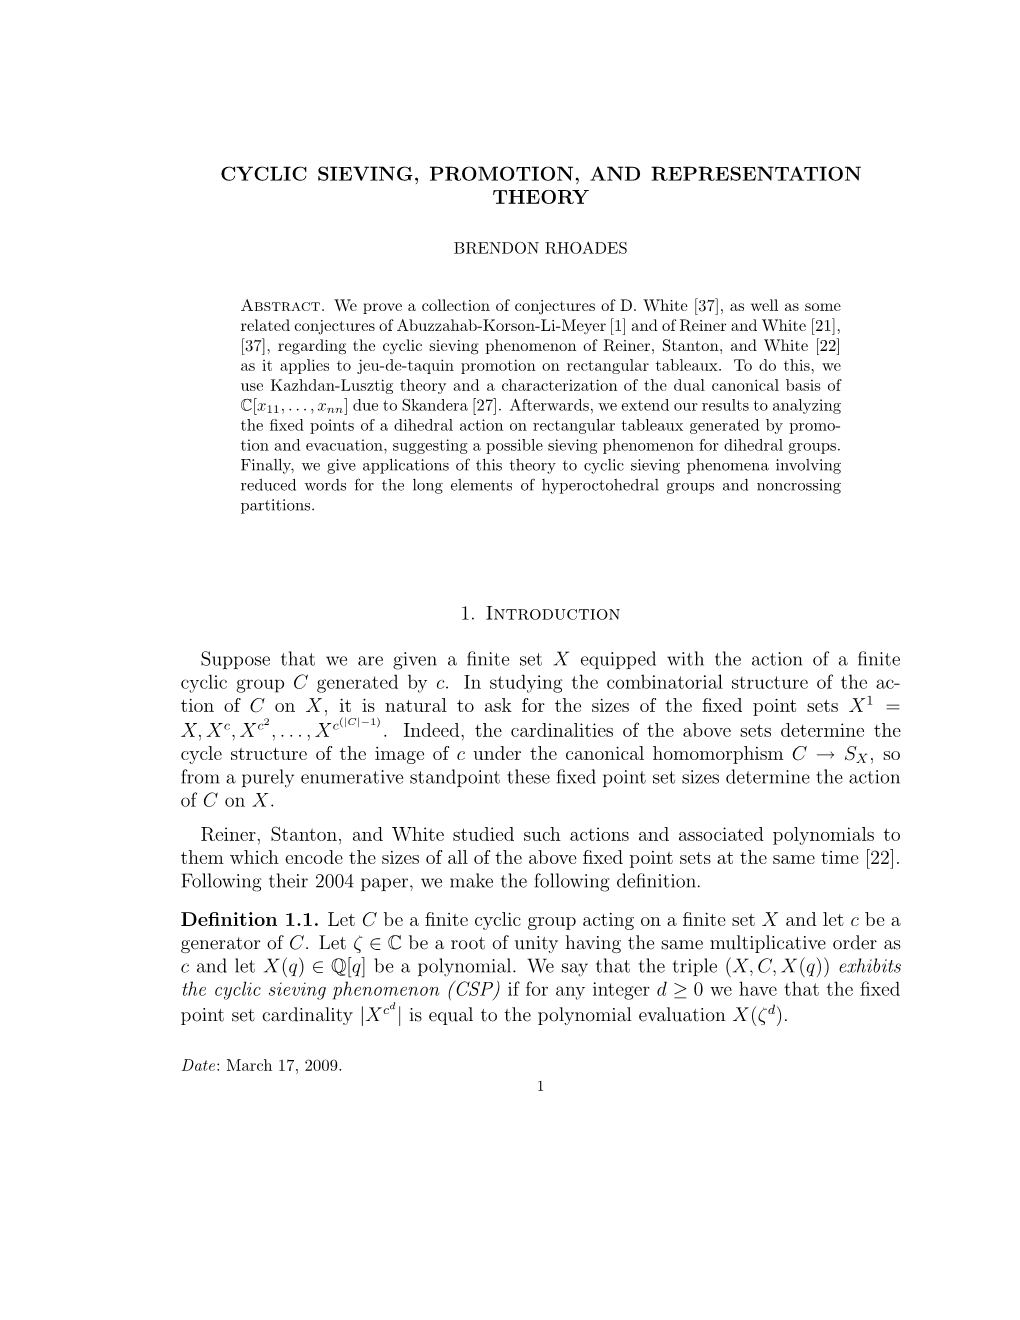 Cyclic Sieving, Promotion, and Representation Theory 11